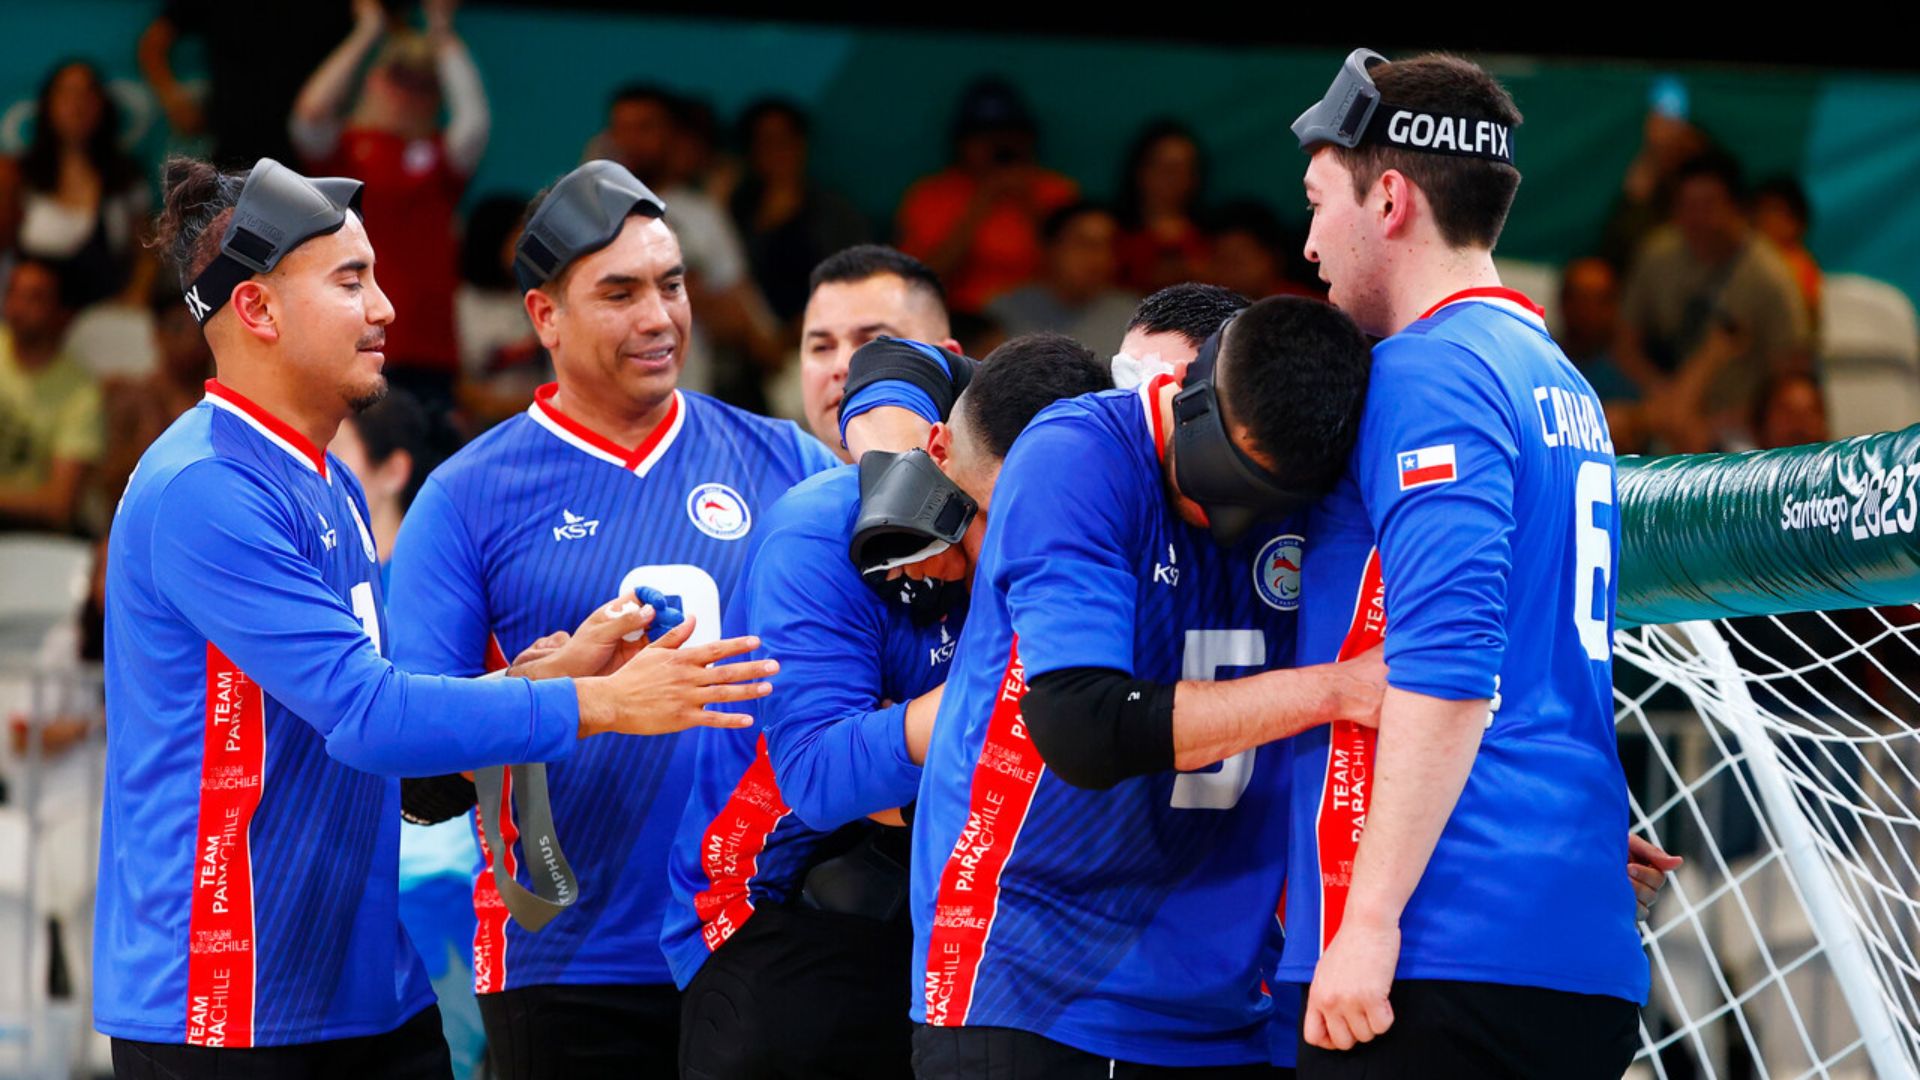 Chile Secured Its Second Victory and Nurtures Hopes in Male Goalball